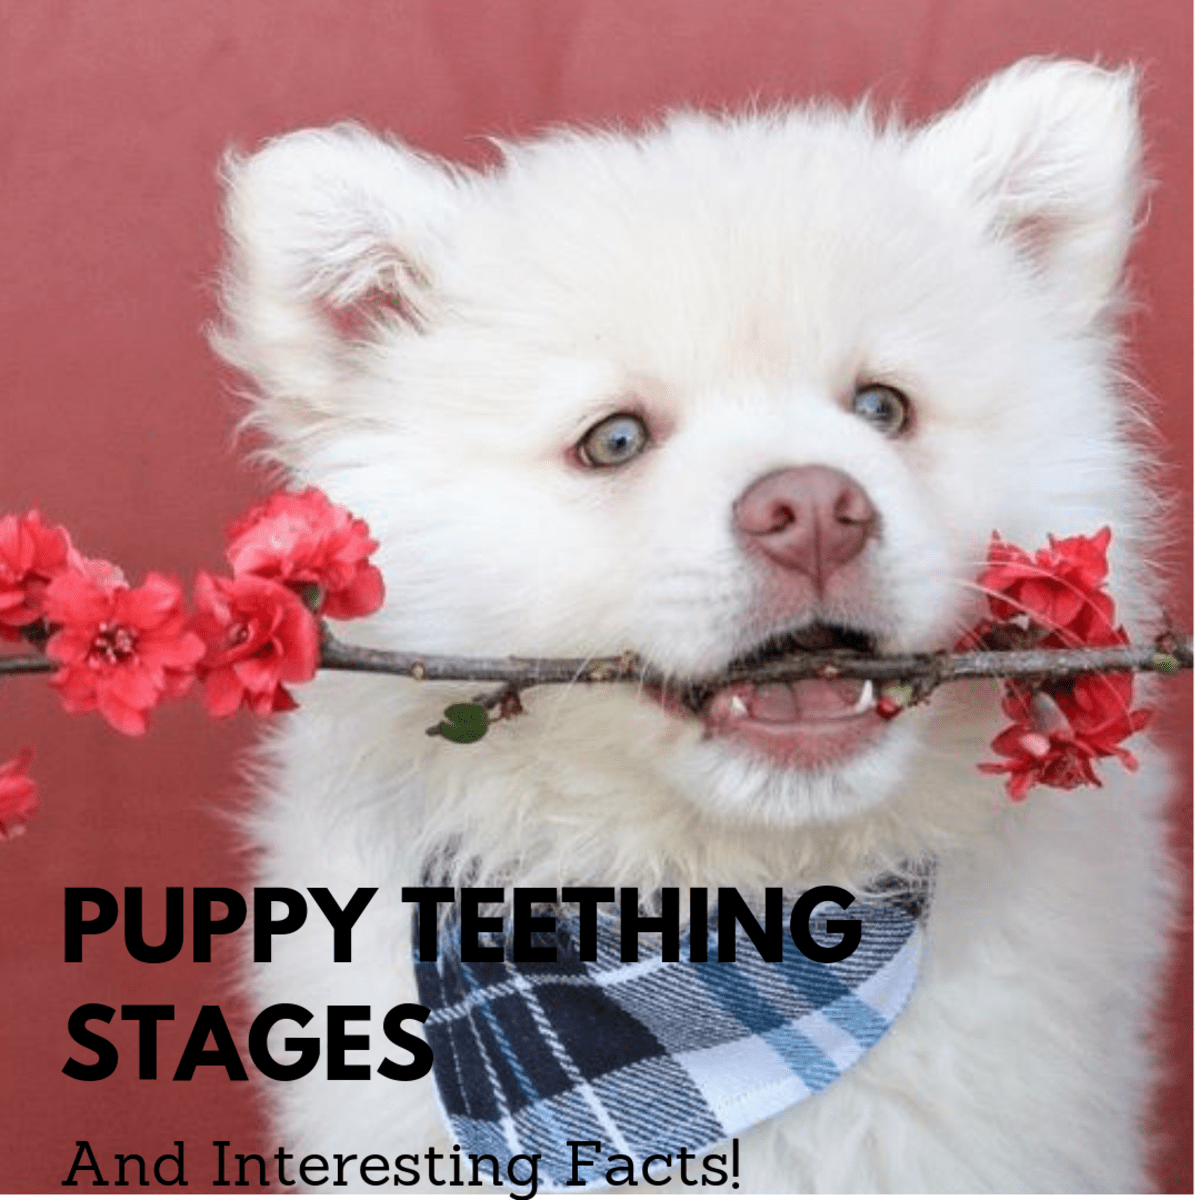 what puppy teeth fall out last